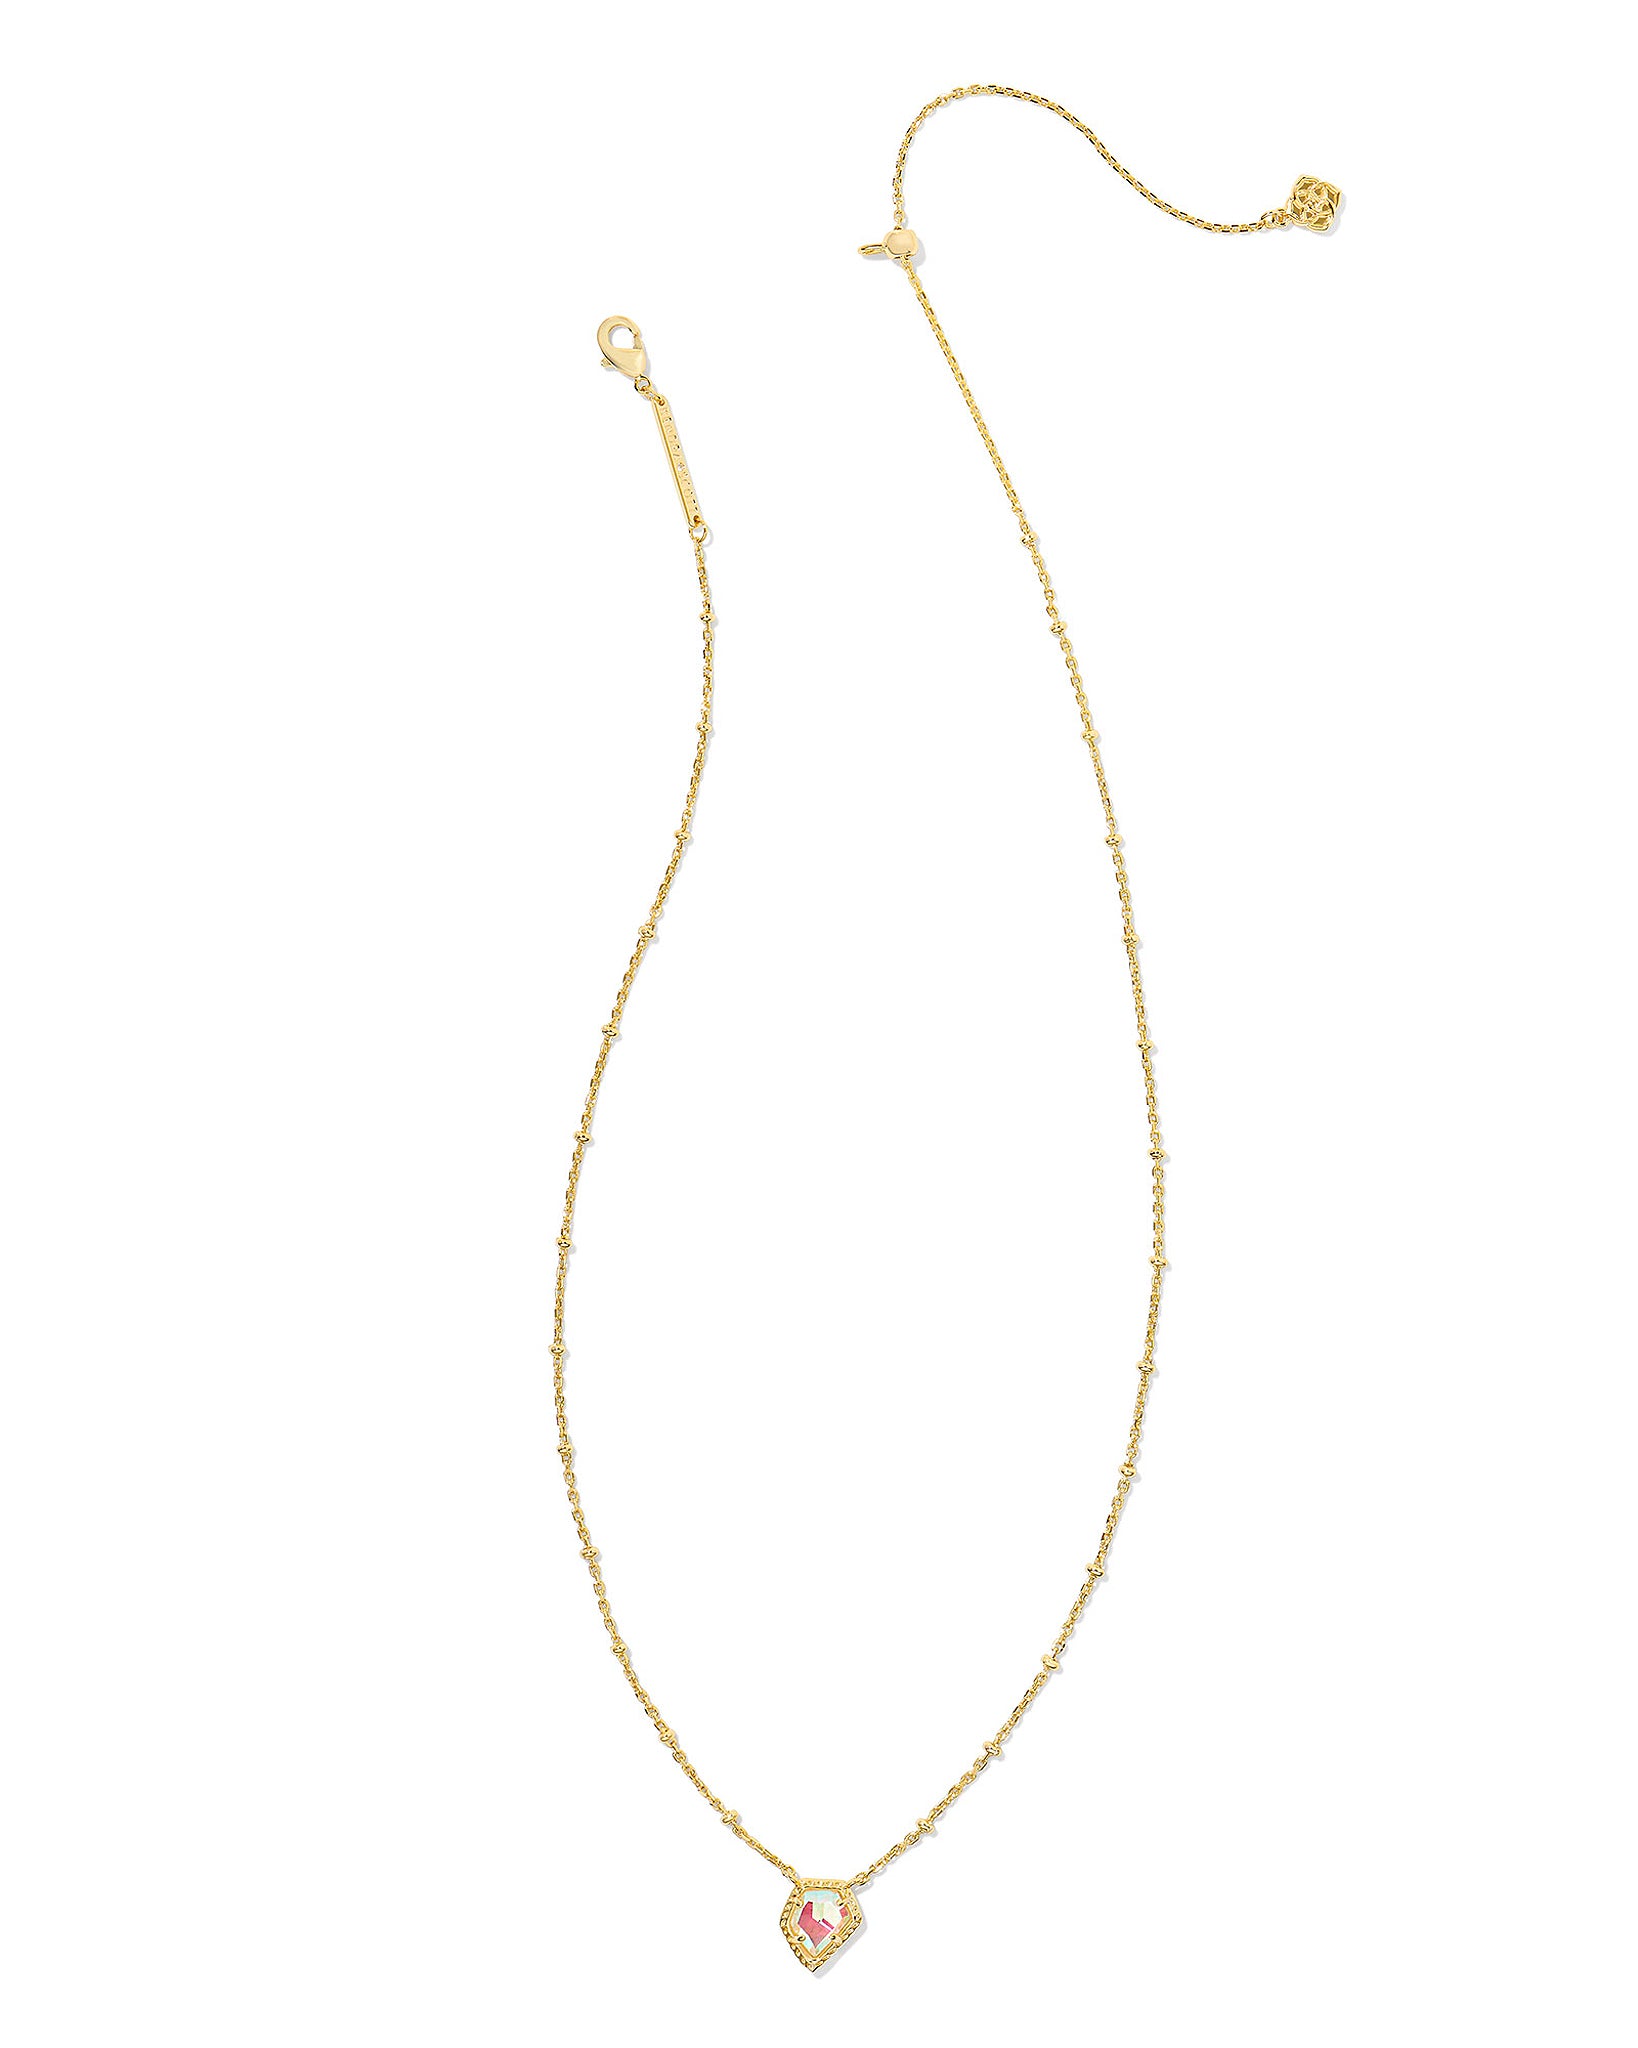 Kendra Scott Tessa Framed Satellite Chain Pendant Necklace in Dichroic Glass and Gold Plated